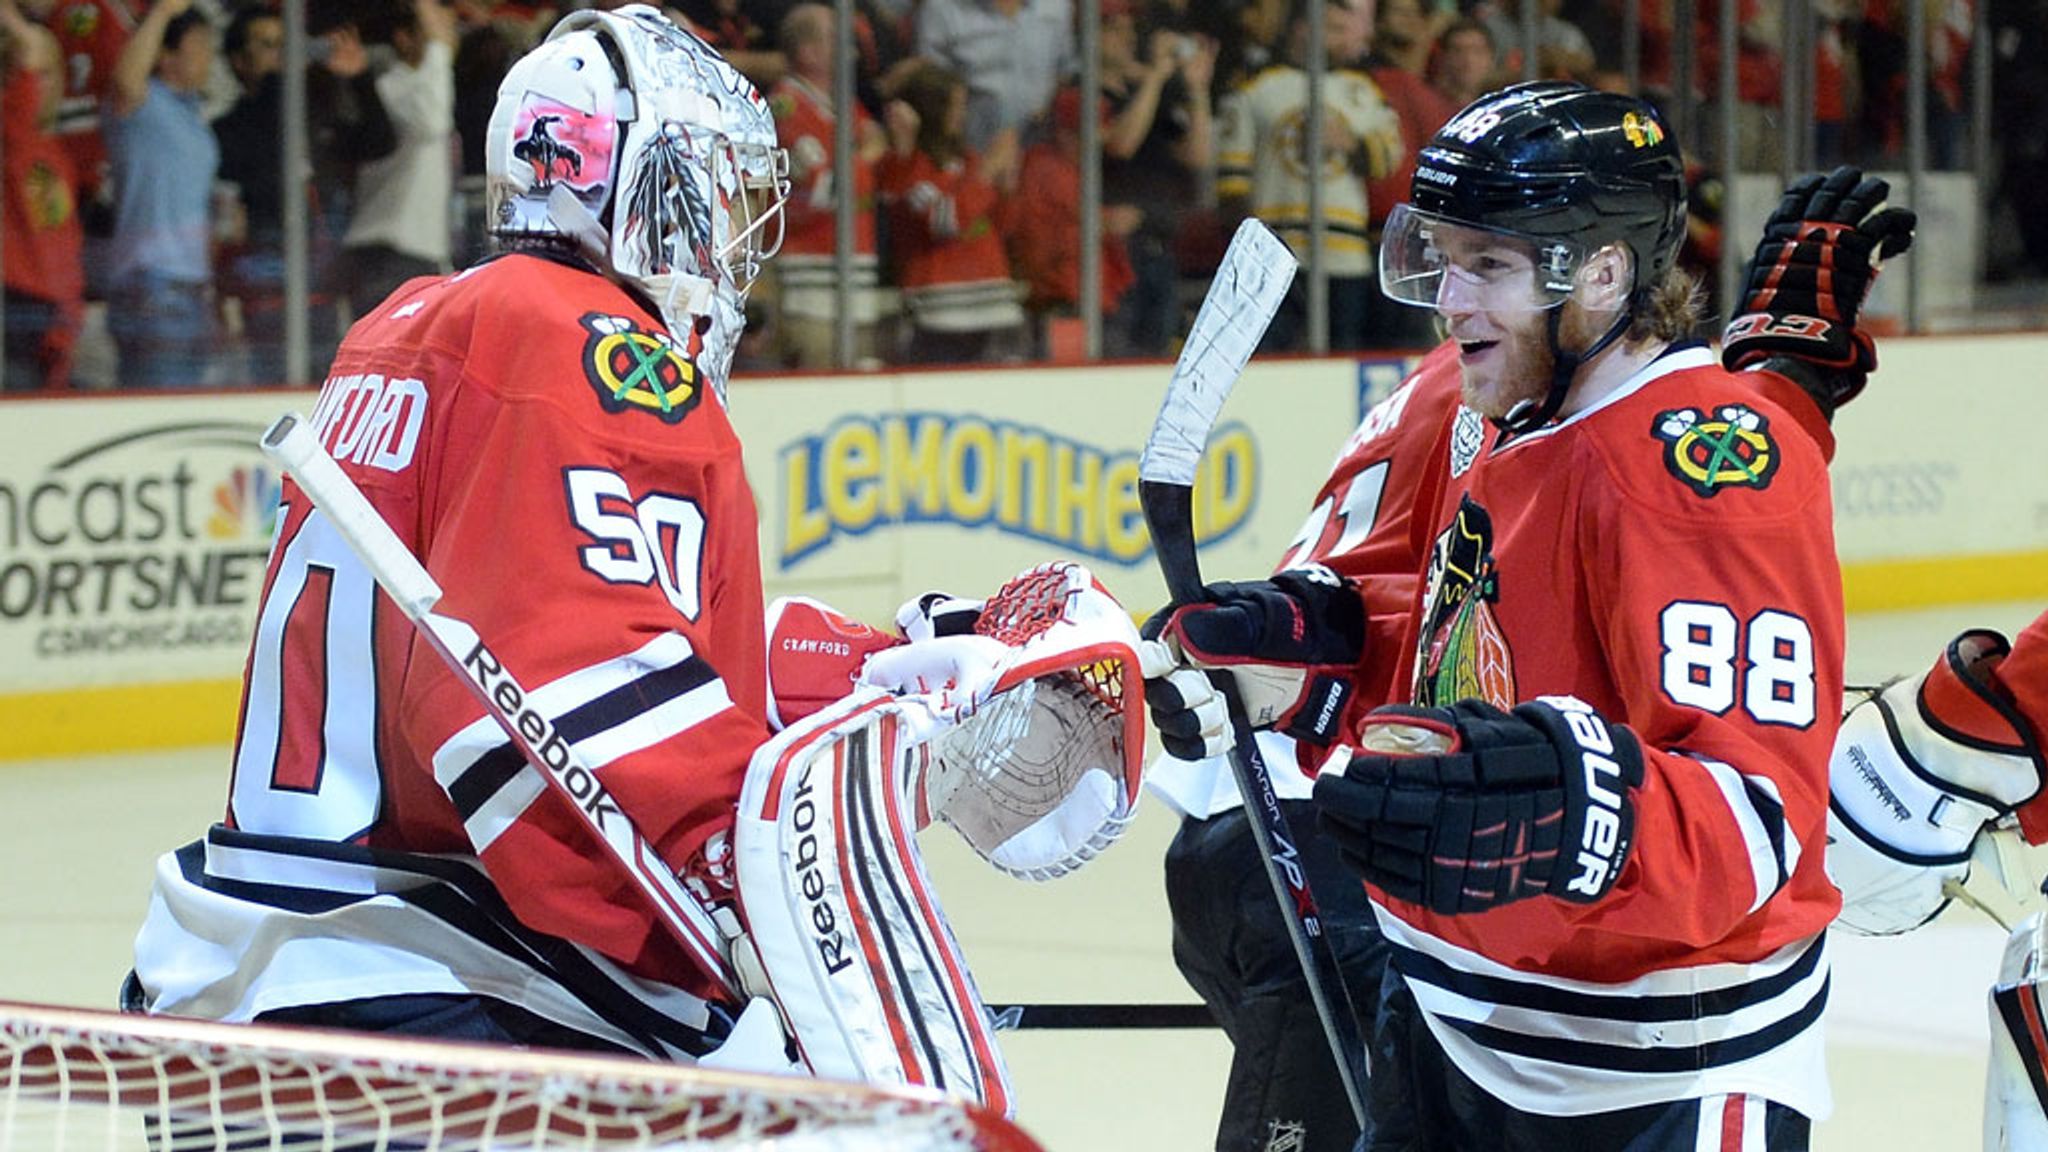 Blackhawks win Stanley Cup on Dave Bolland's third period goal (Video)